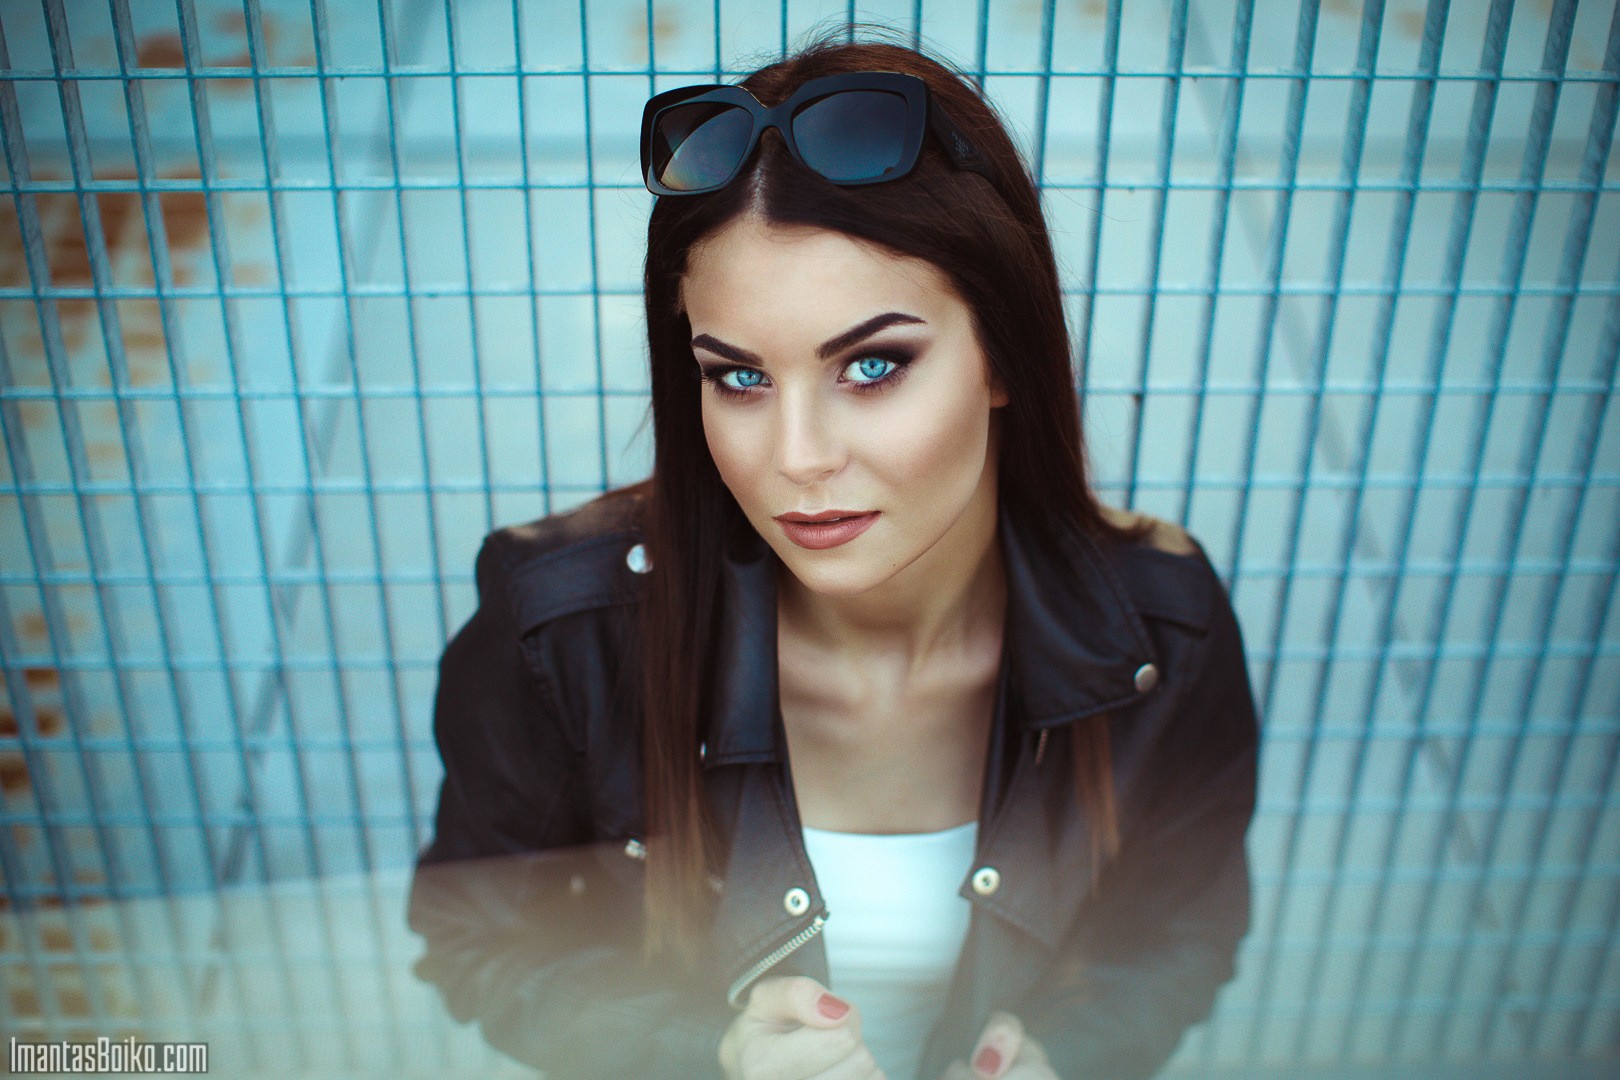 People 1620x1080 women portrait face women with glasses blue eyes women with shades sunglasses red nails painted nails long hair fence metal grid women outdoors urban looking at viewer leather jacket Imantas Boiko